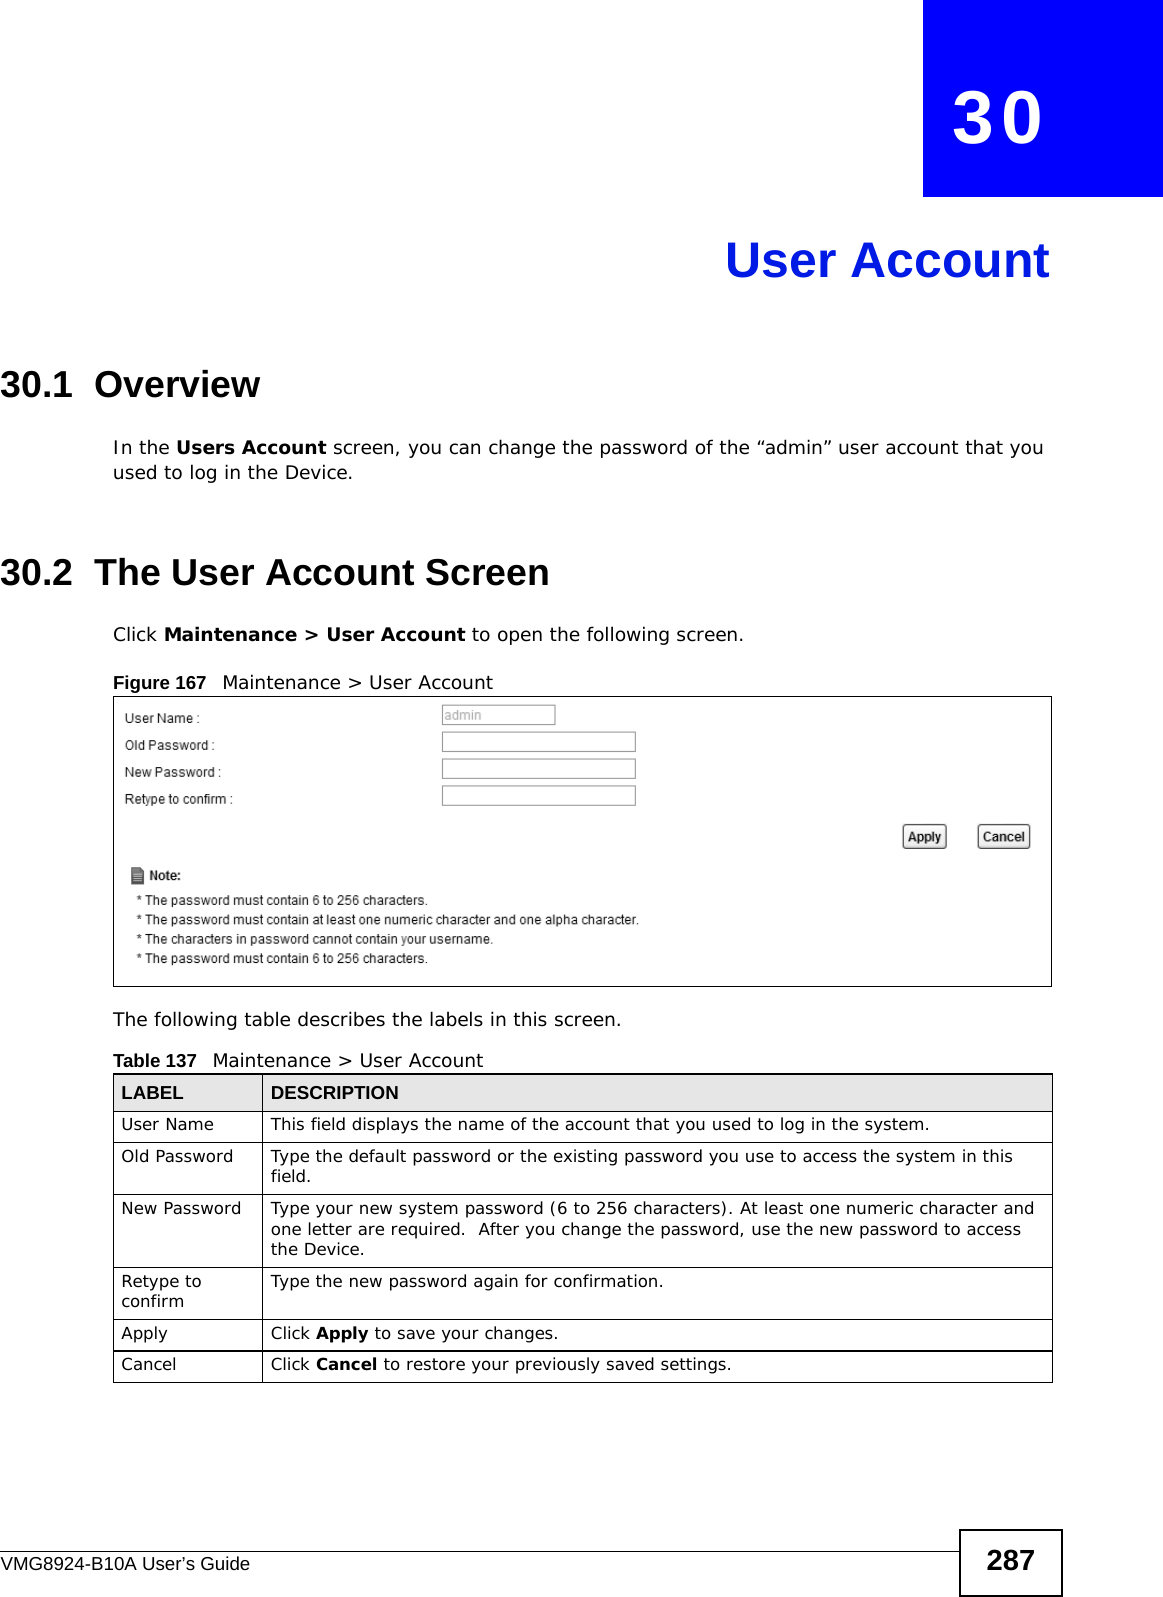 VMG8924-B10A User’s Guide 287CHAPTER   30User Account30.1  Overview In the Users Account screen, you can change the password of the “admin” user account that you used to log in the Device. 30.2  The User Account ScreenClick Maintenance &gt; User Account to open the following screen.Figure 167   Maintenance &gt; User AccountThe following table describes the labels in this screen. Table 137   Maintenance &gt; User AccountLABEL DESCRIPTIONUser Name This field displays the name of the account that you used to log in the system. Old Password Type the default password or the existing password you use to access the system in this field.New Password Type your new system password (6 to 256 characters). At least one numeric character and one letter are required.  After you change the password, use the new password to access the Device.Retype to confirm Type the new password again for confirmation.Apply Click Apply to save your changes.Cancel Click Cancel to restore your previously saved settings.